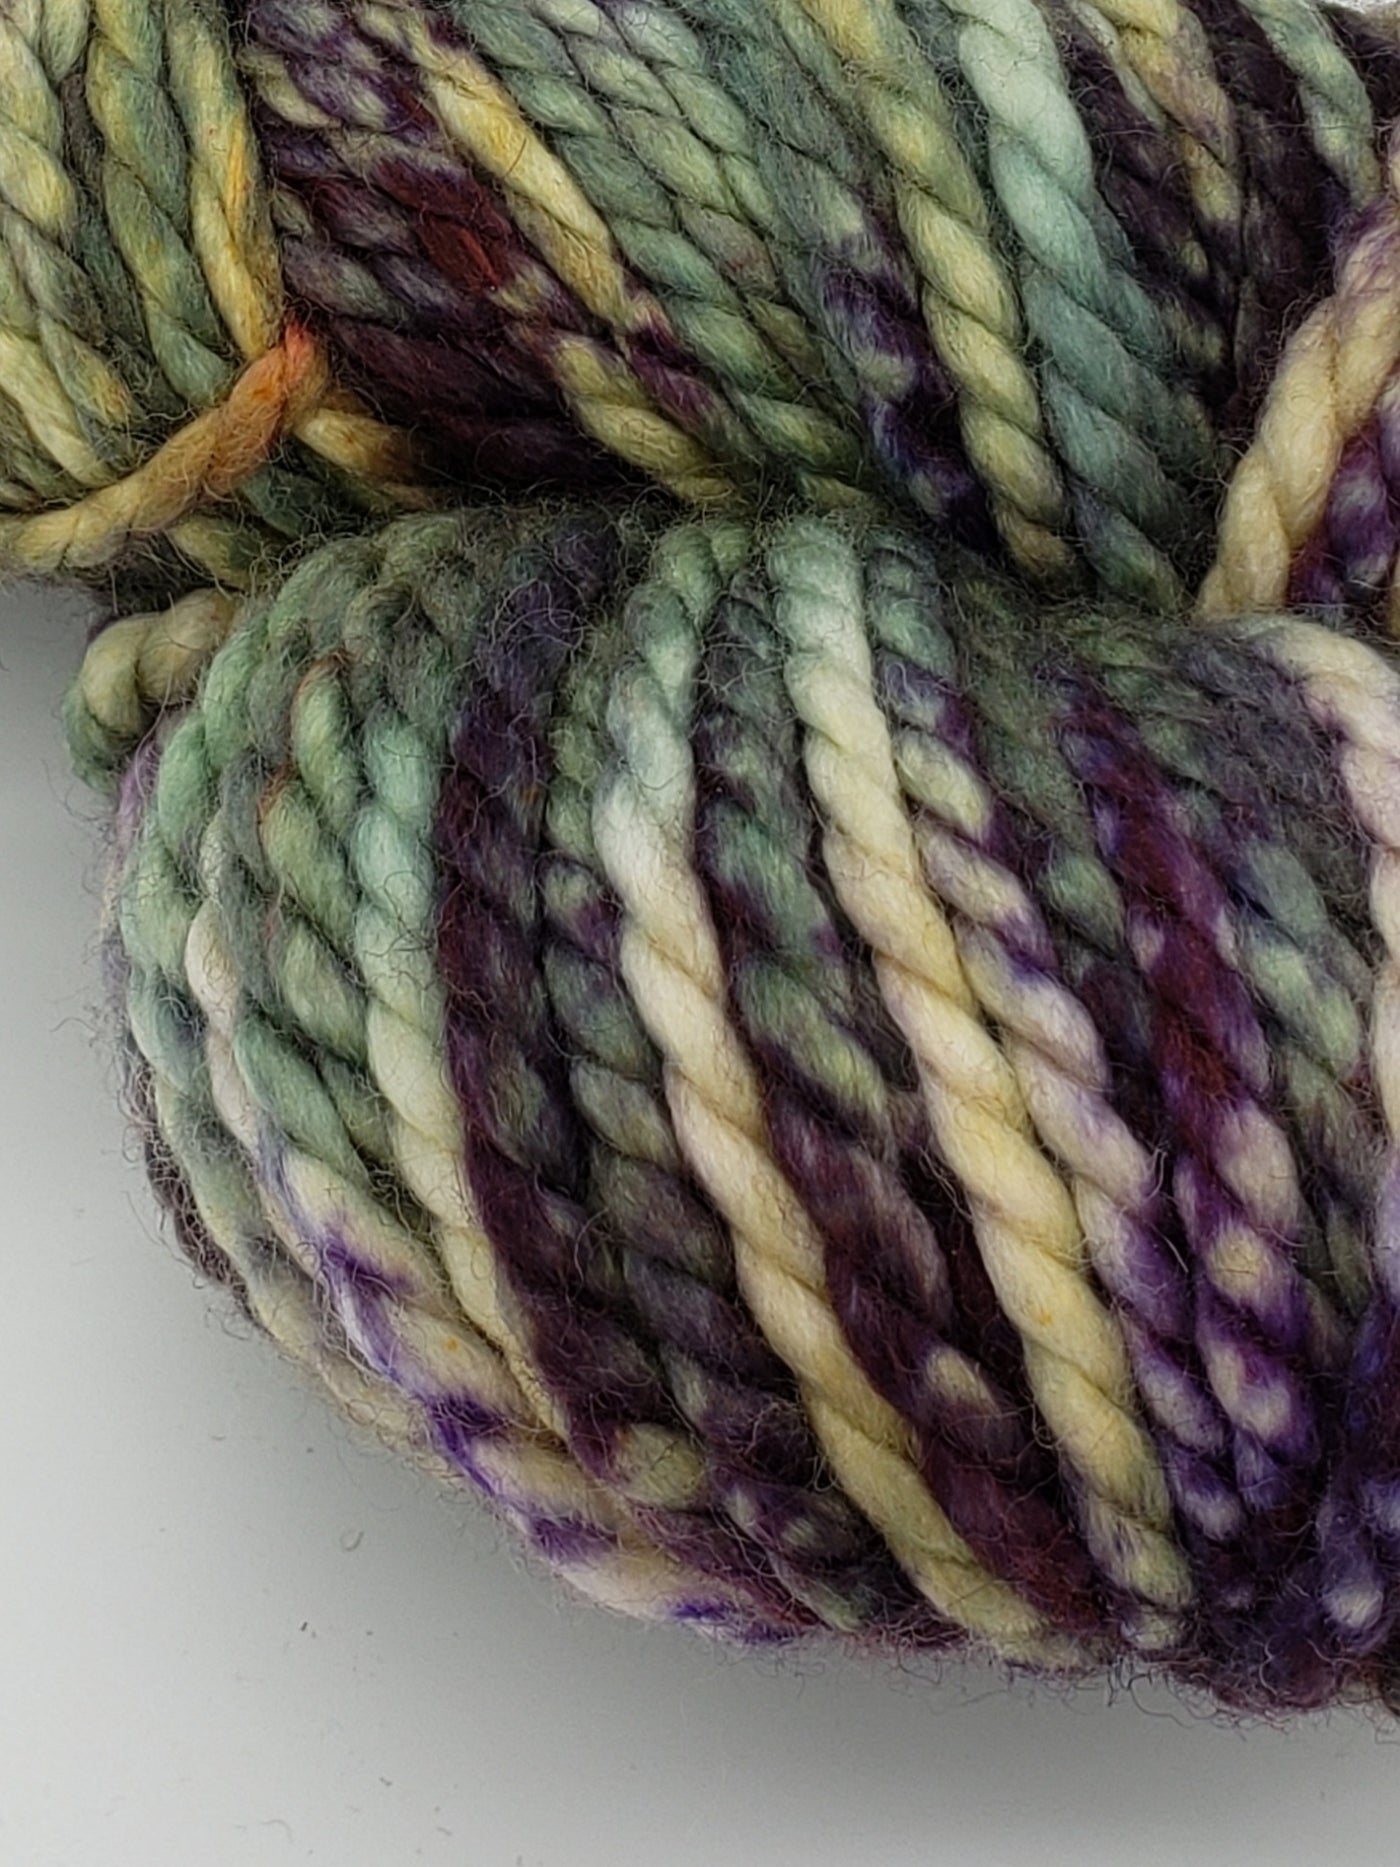 FALL HYDRANGEA - BIG TWISTY 2 PLY - Hand Dyed Shades of Purple, Green,  Yellow and Cream Chunky Yarn for Rug Hooking - RSS253